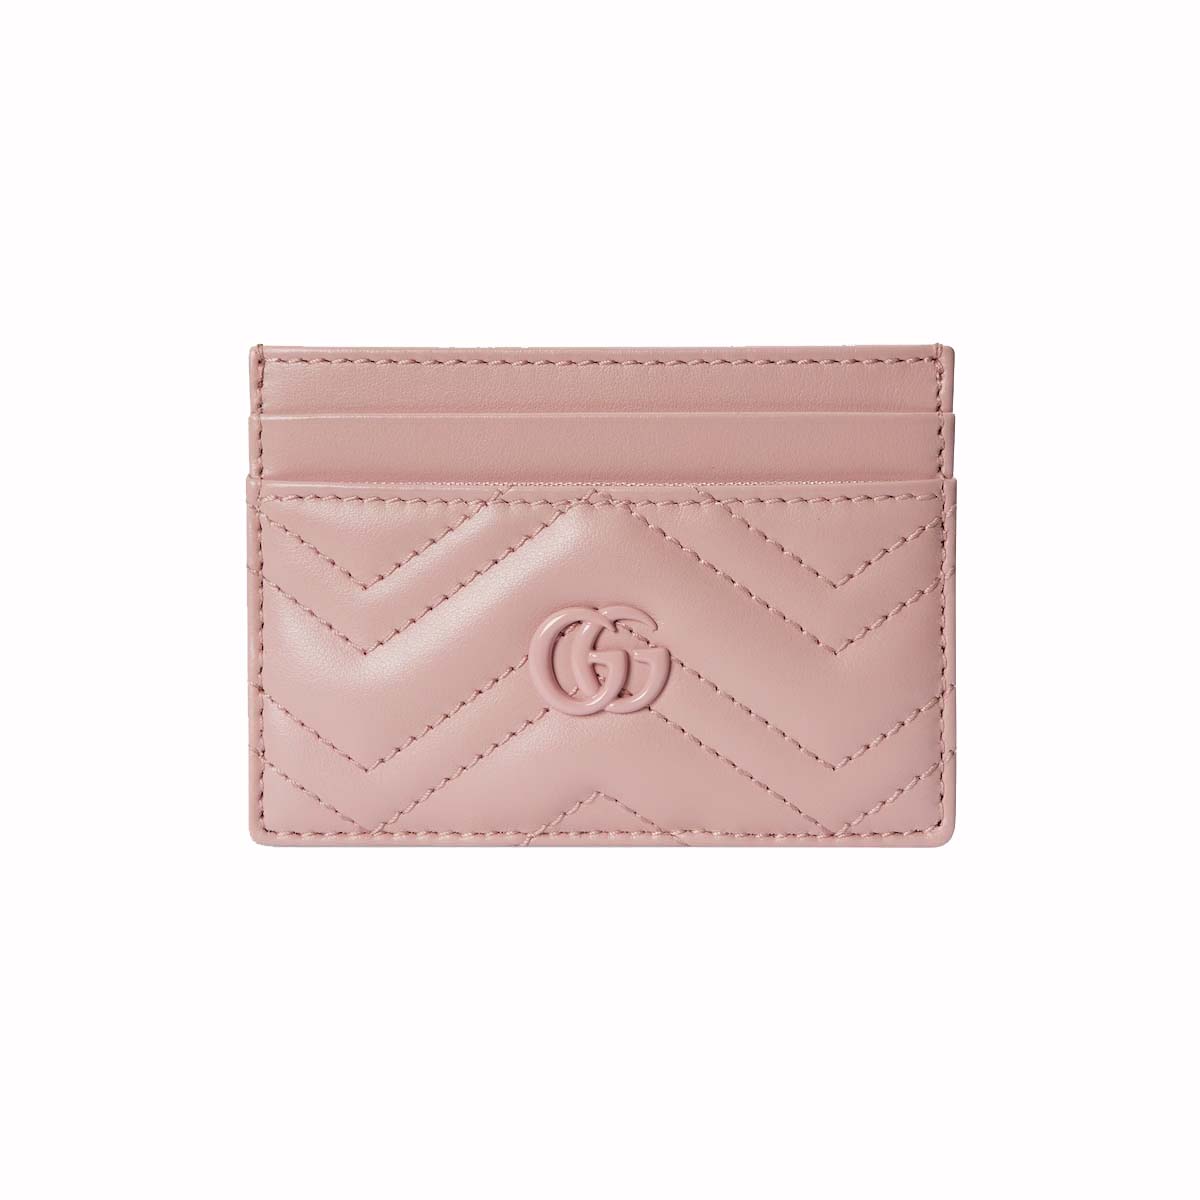 GG Marmont leather cardholder